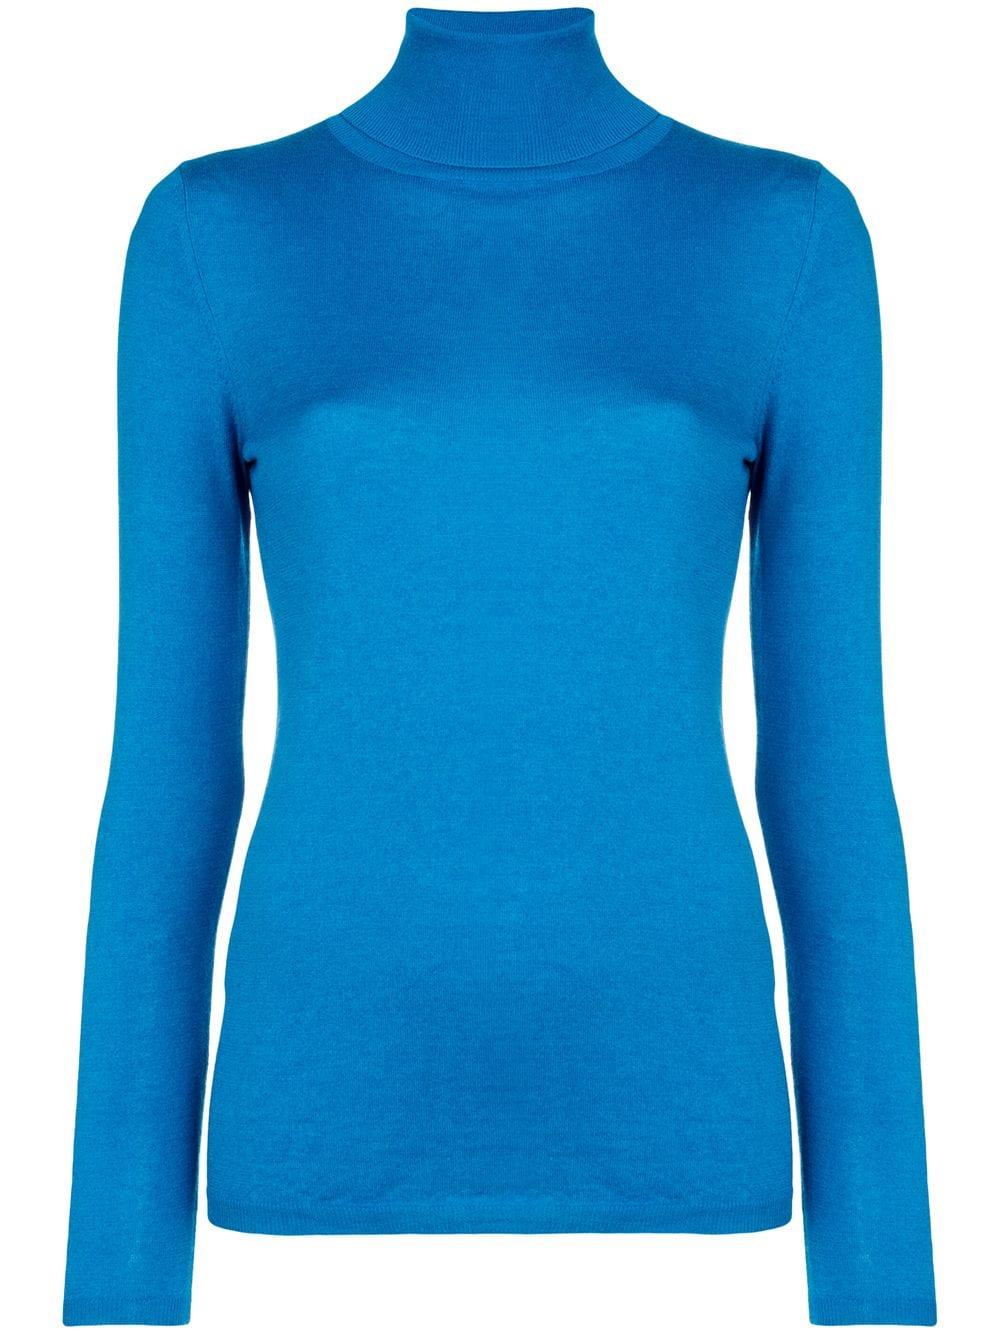 Snobby Sheep Cashmere Roll Neck Fine Knit Sweater in Blue - Lyst